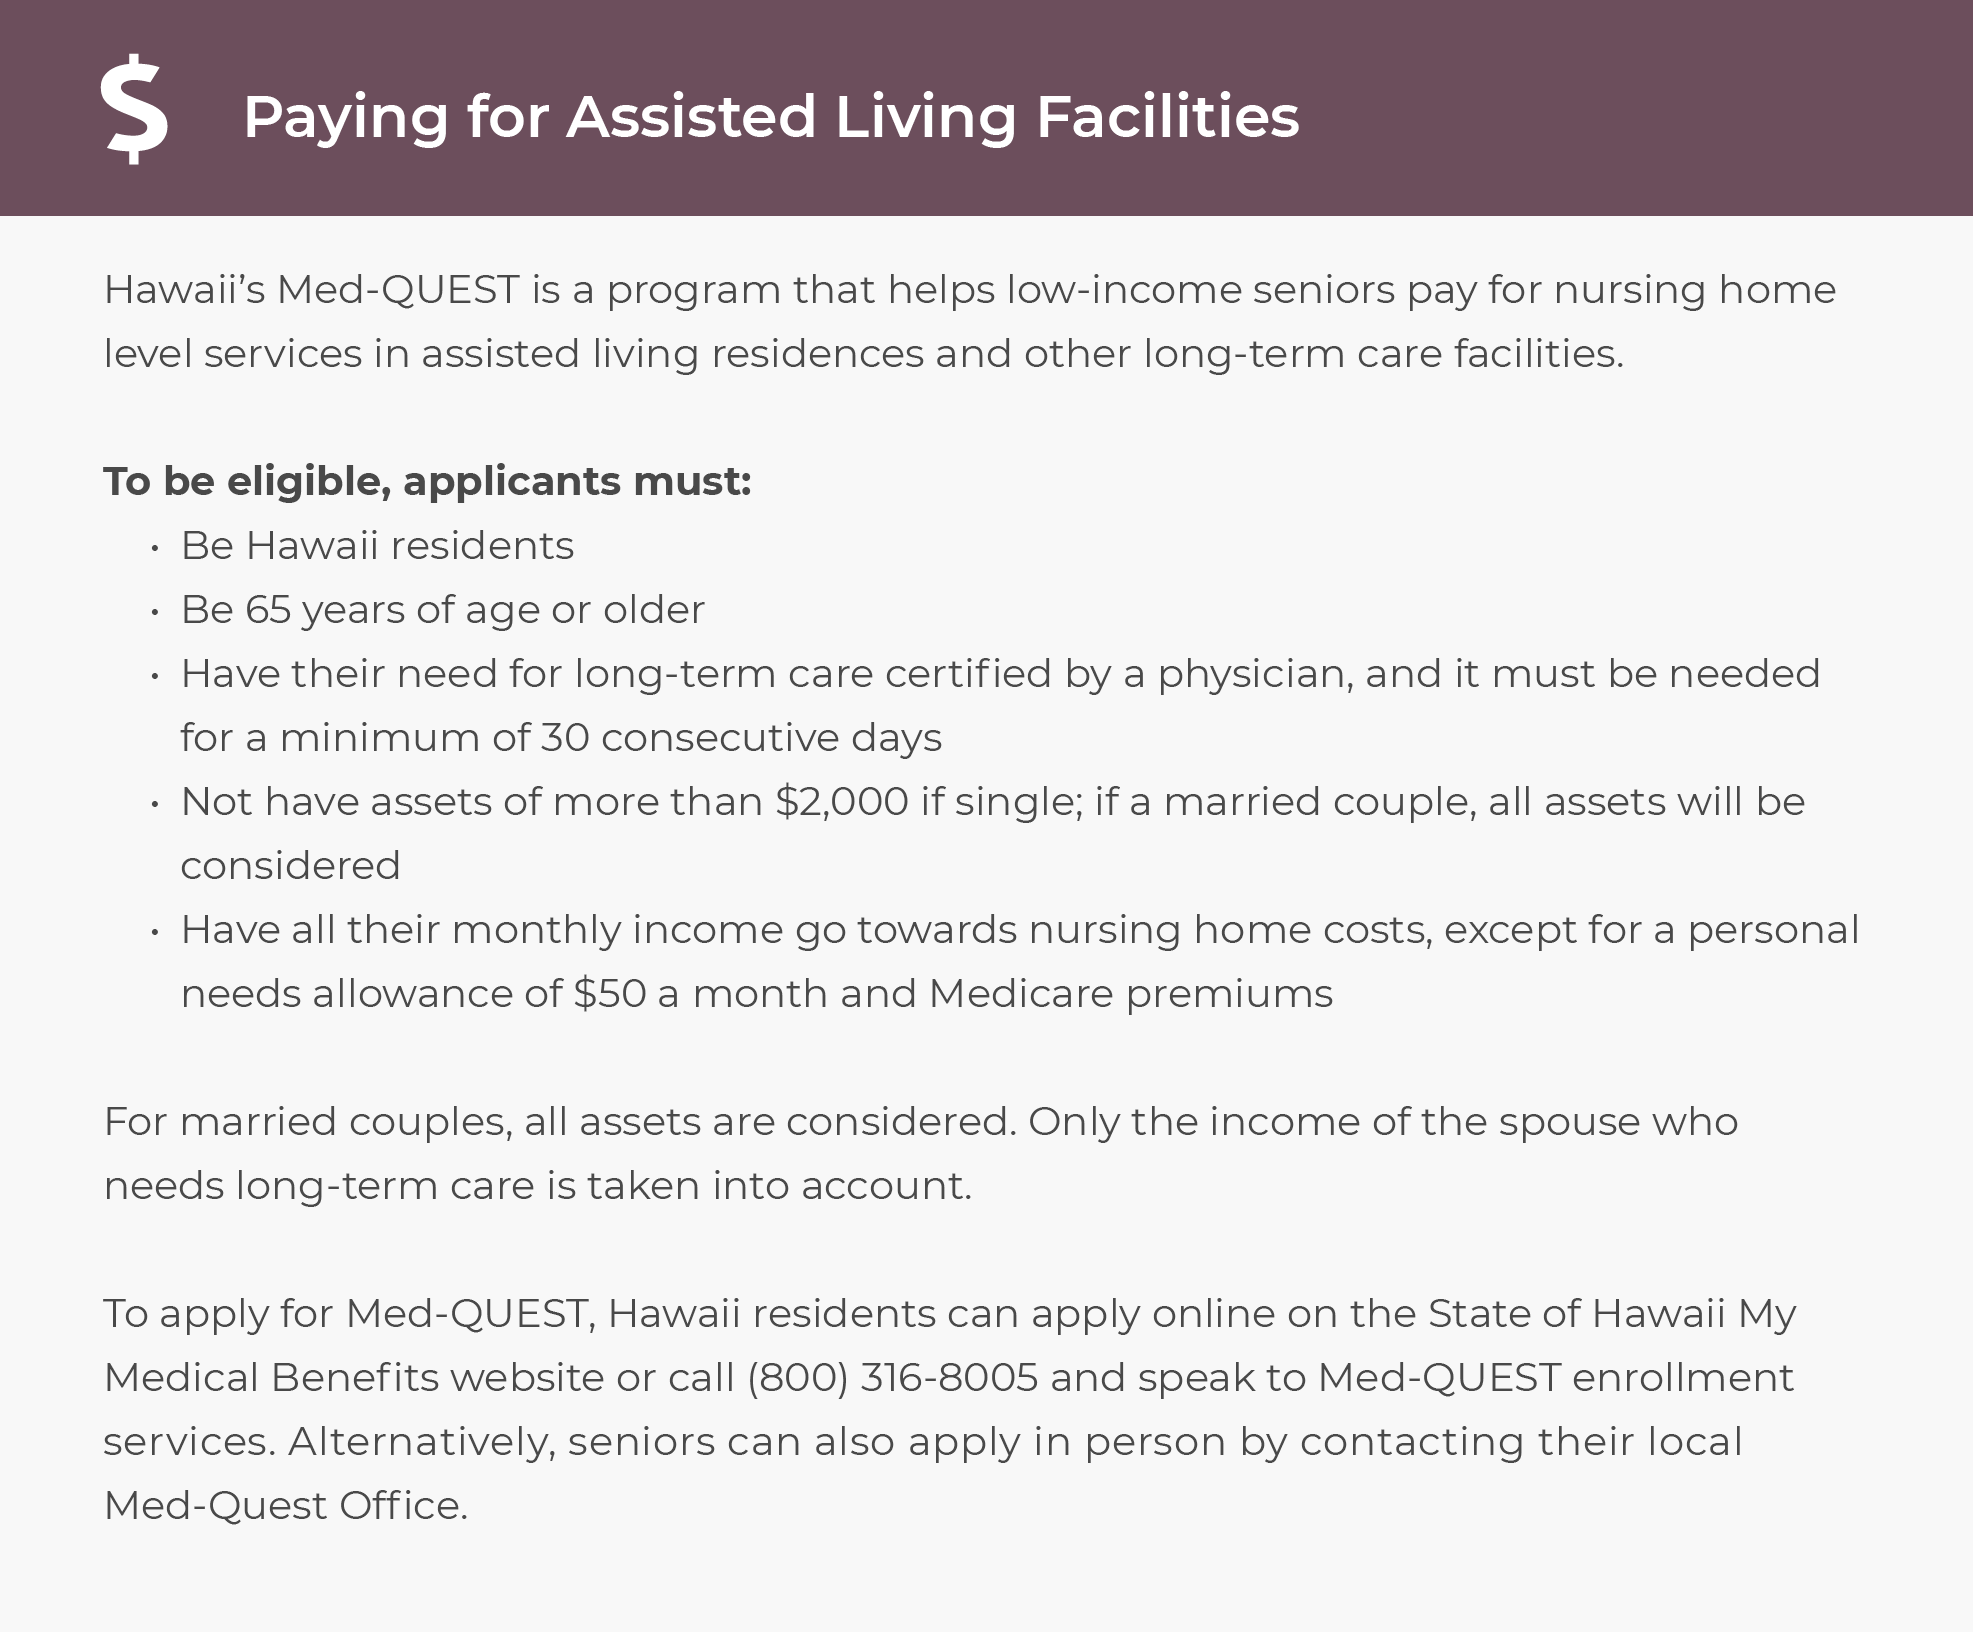 Paying for Assisted Living Facilities in Hawaii